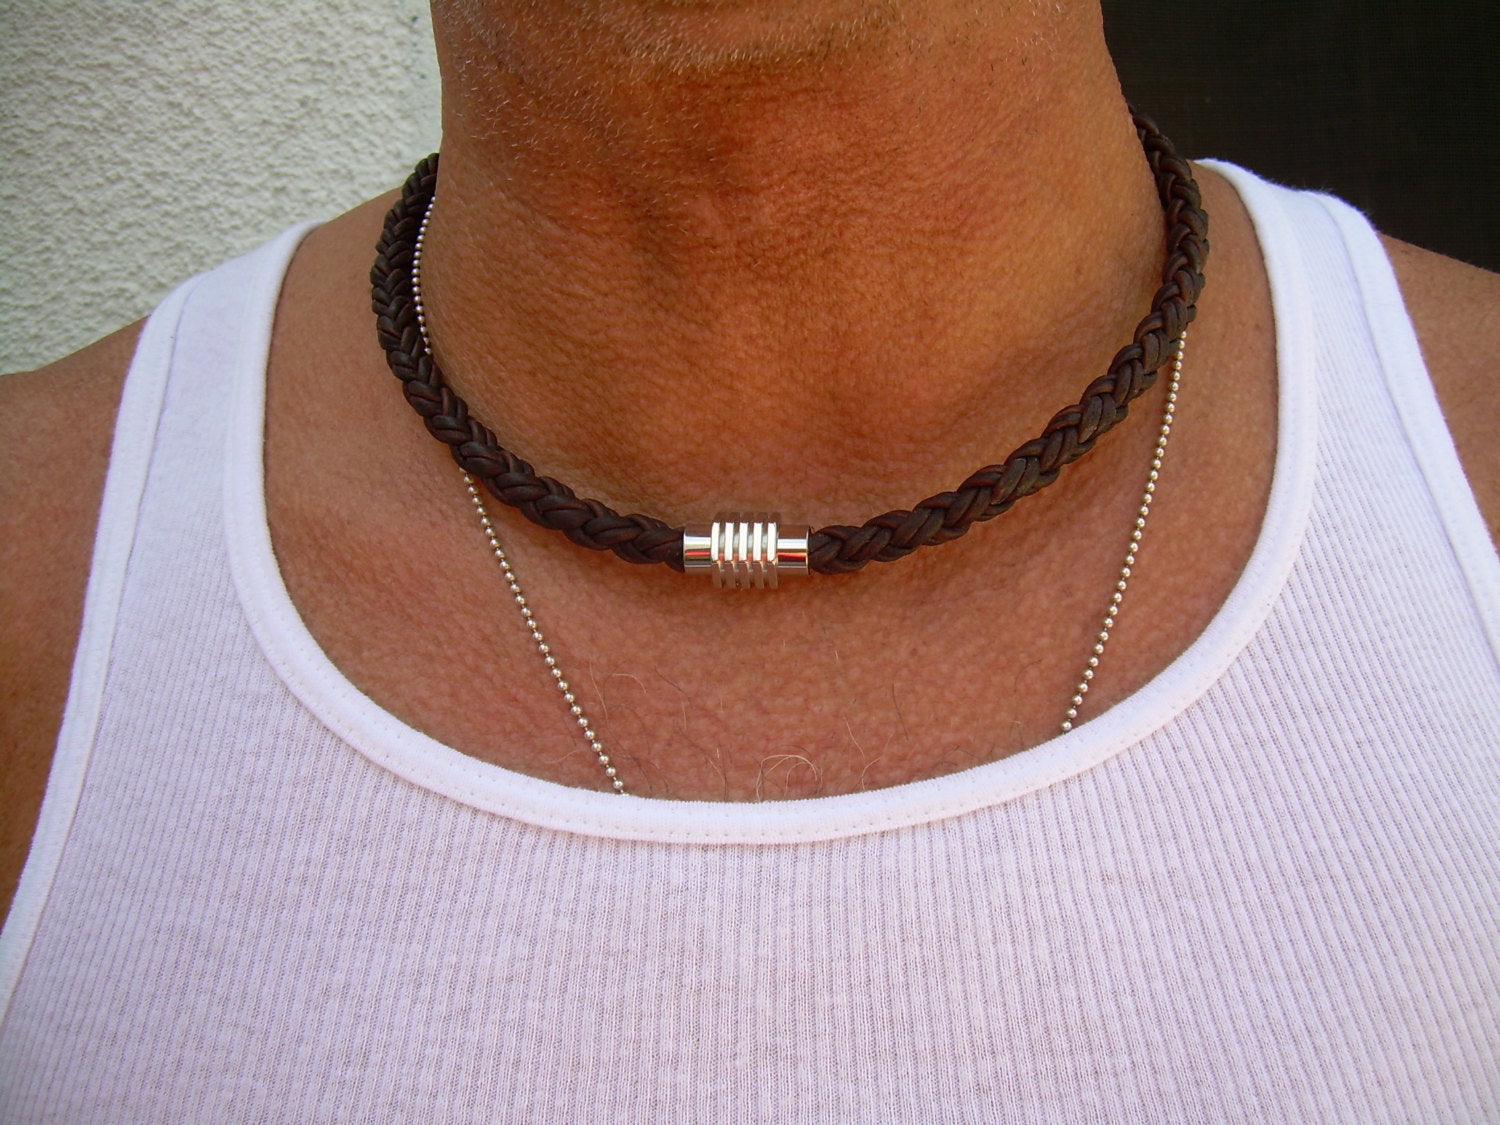 Mens Leather Necklace, Mens Necklace, Mens Jewelry, Stainless Steel Magnetic Clasp, Groomsmen, Fathers Day, Mens Gift, Groom 16 / Natural Dark Brown